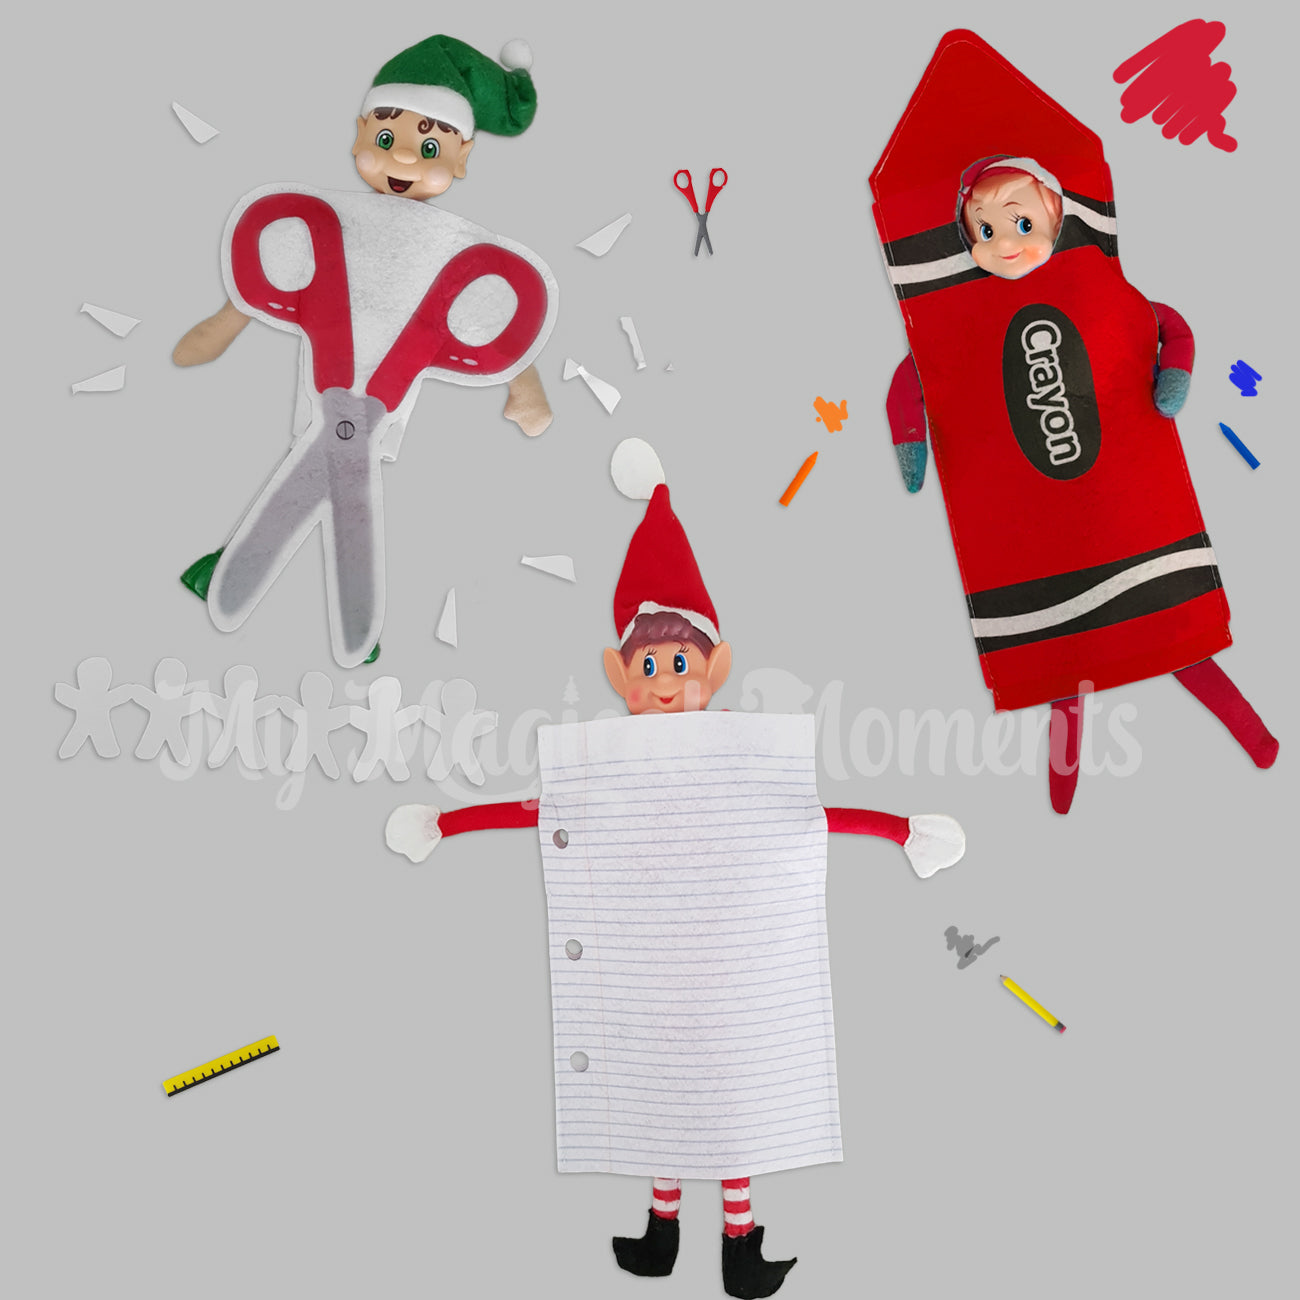 3 elves dressed in costumes. One wearing a red pair of scissors, another elf dressed as paper and the last elf wearing a red crayon costume. There is elf sized scissors and crayons around them